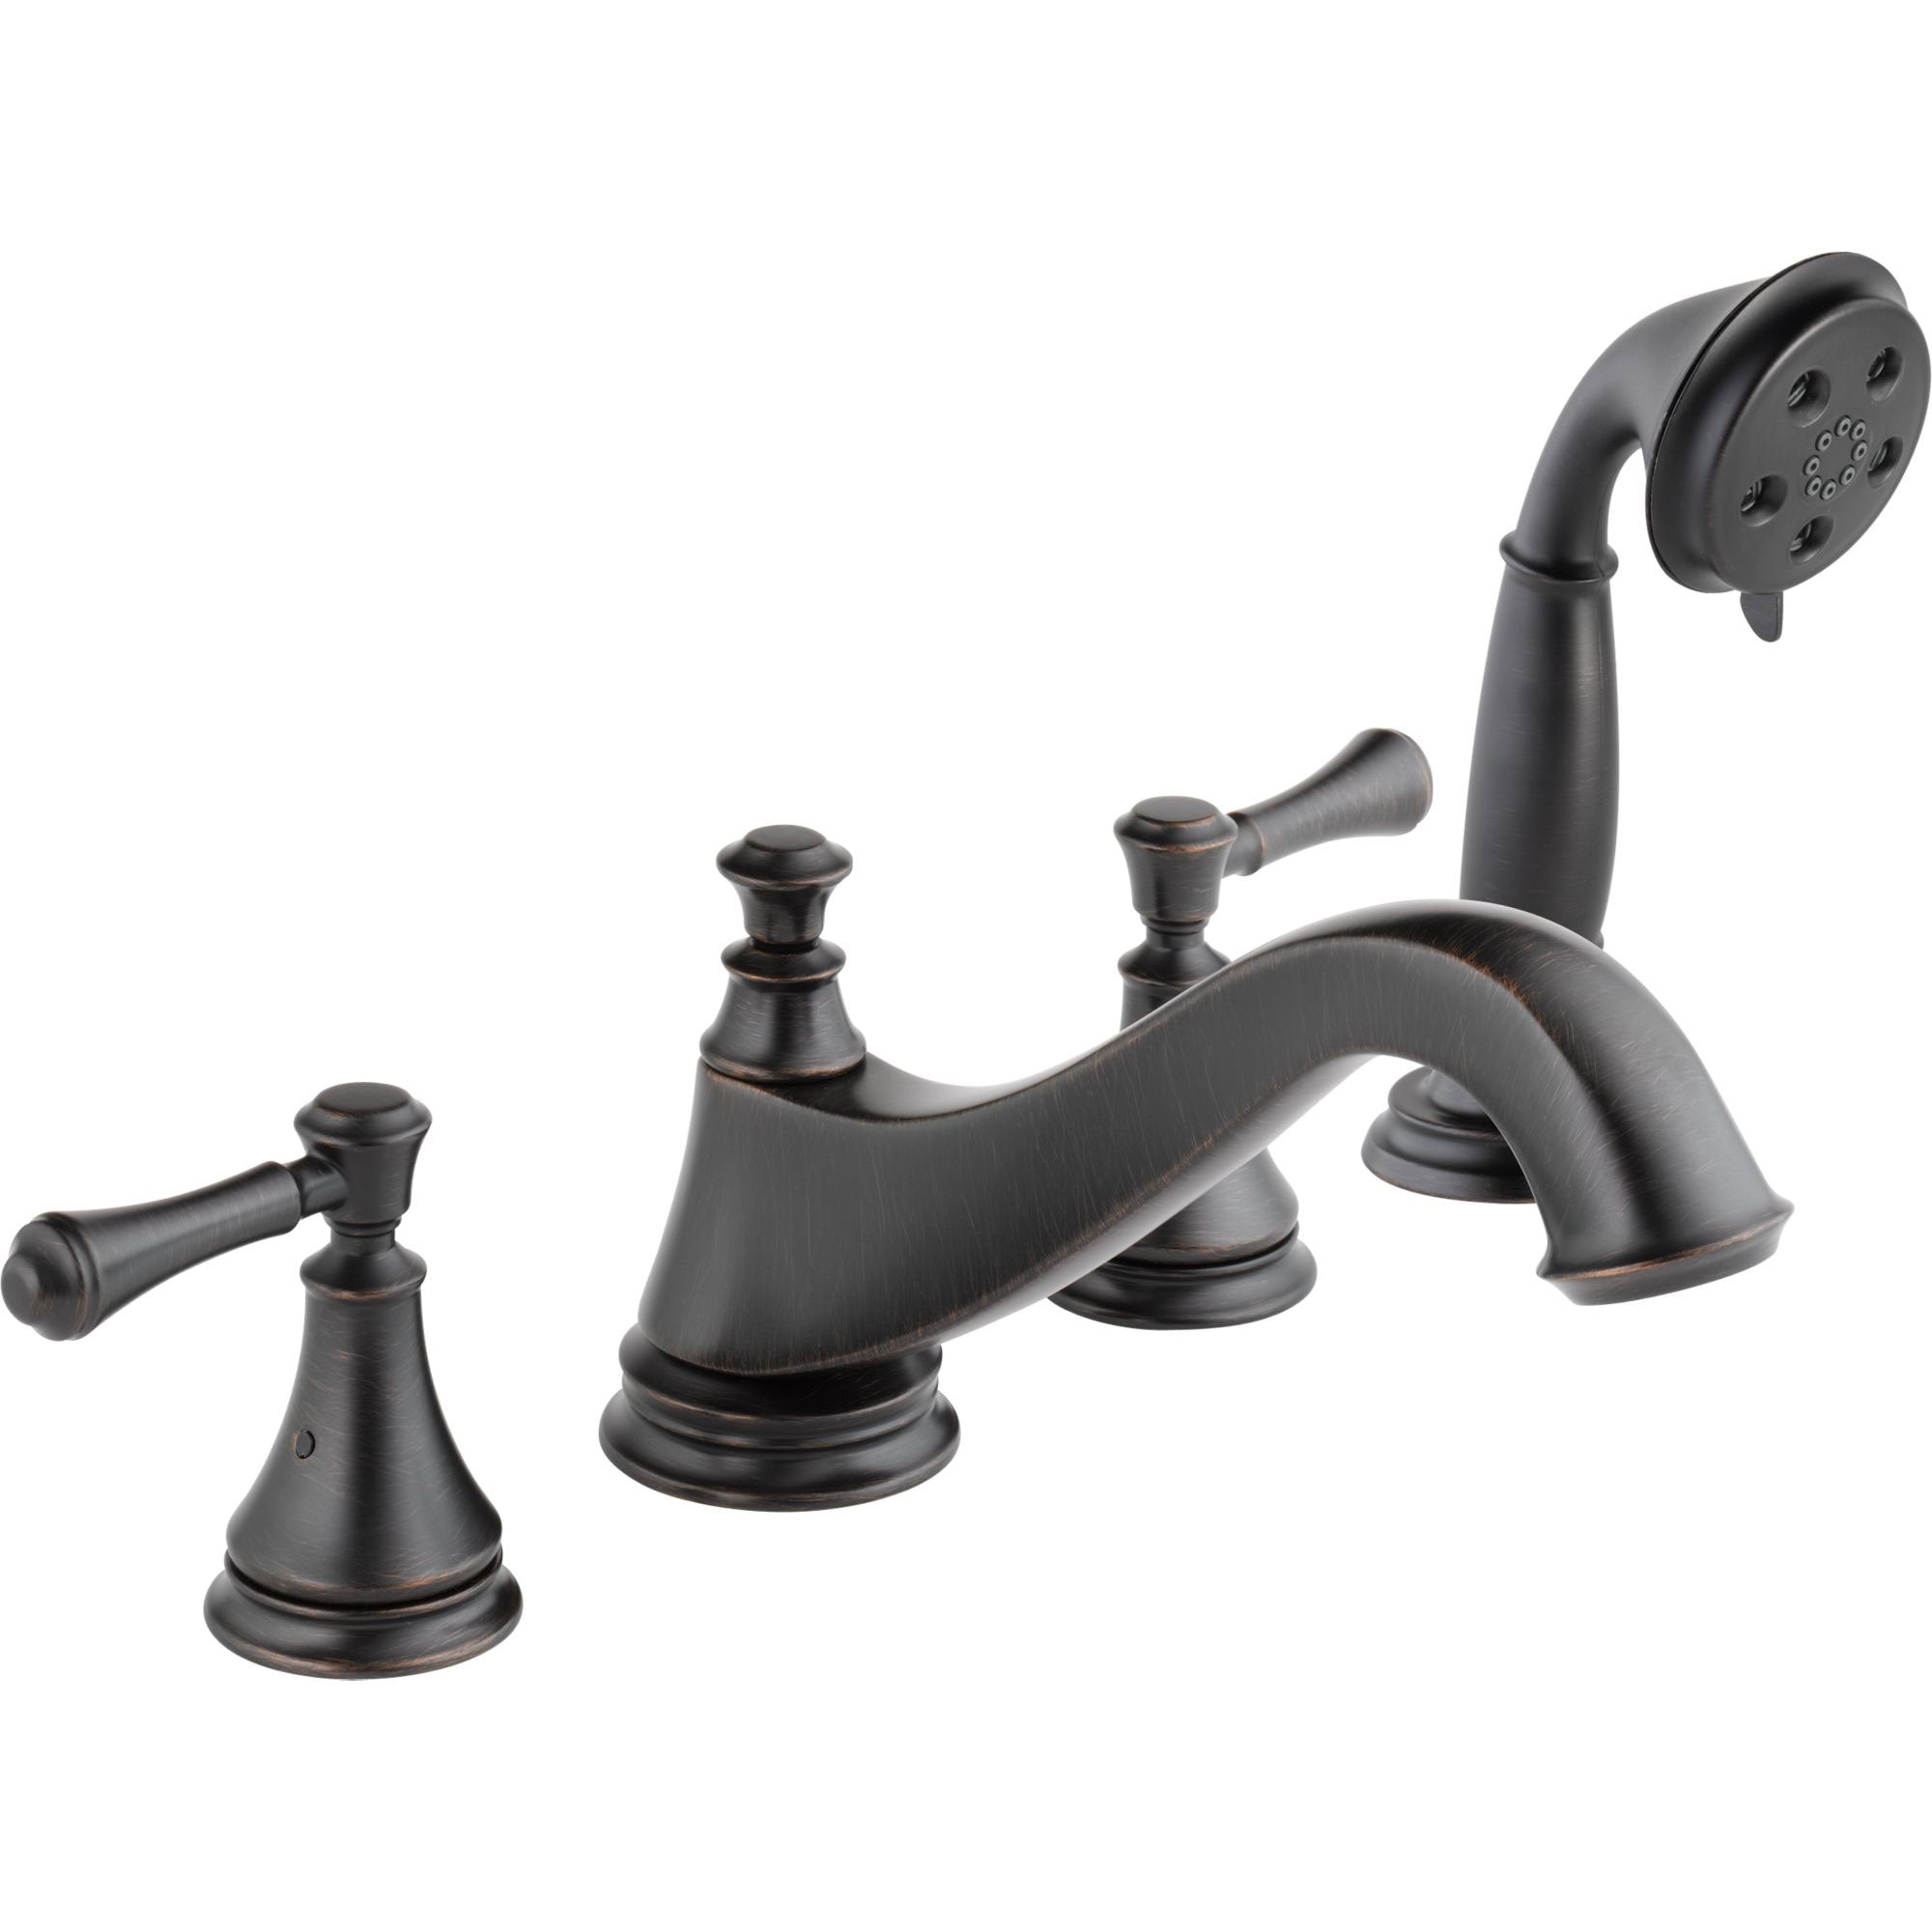 Delta Cassidy Venetian Bronze Low Arc Spout Roman Tub Filler Faucet with Hand Shower Spray INCLUDES Valve and Lever Handles D1071V